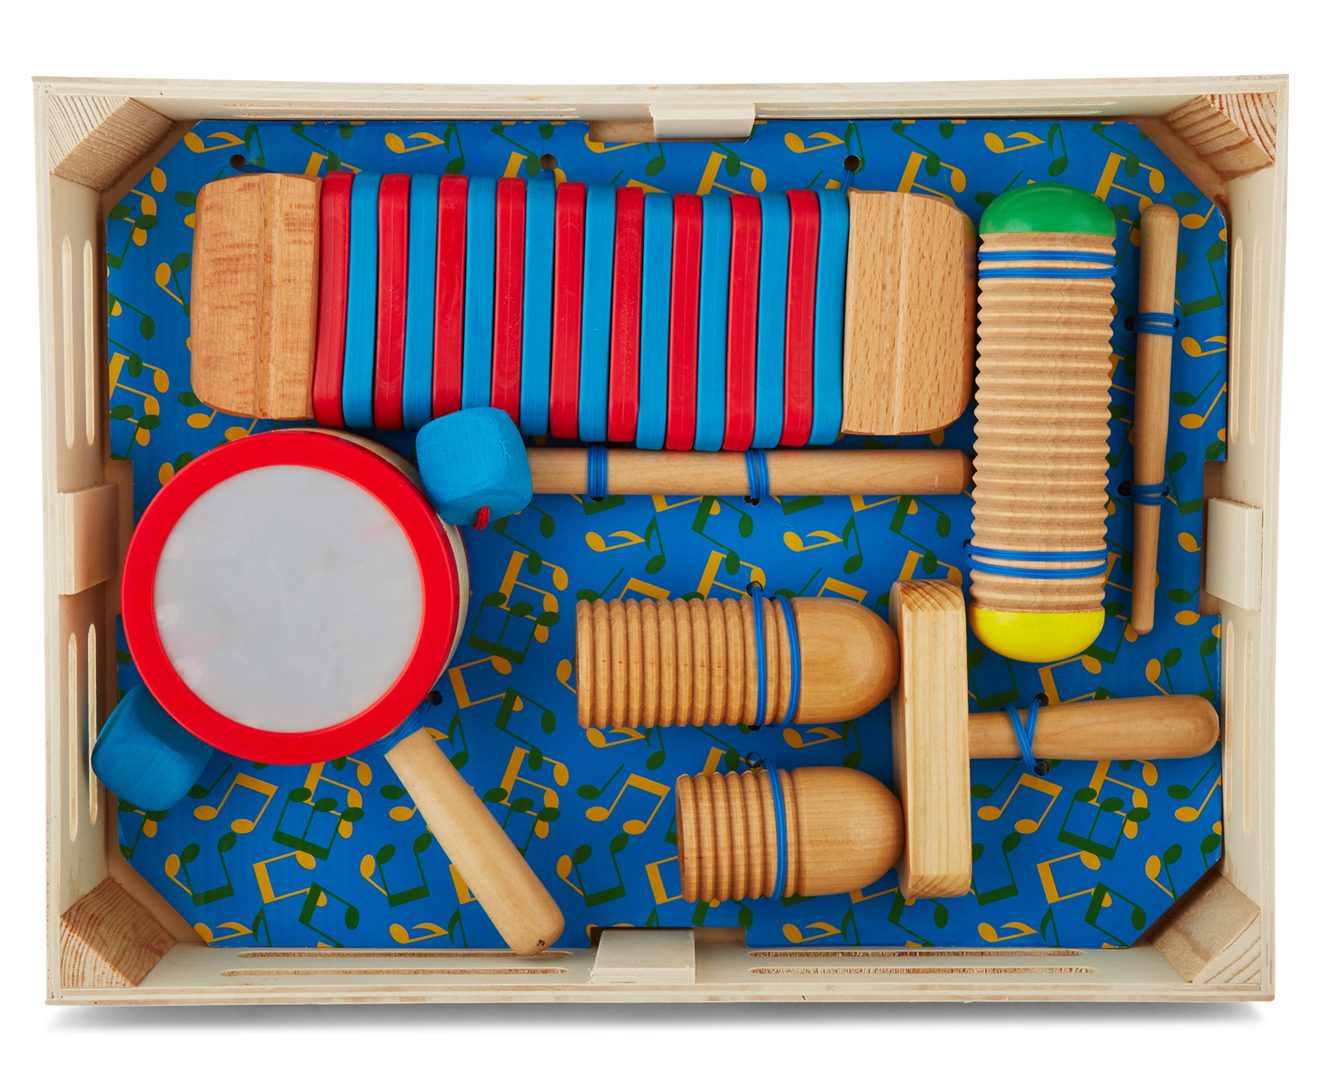 melissa and doug band in a box